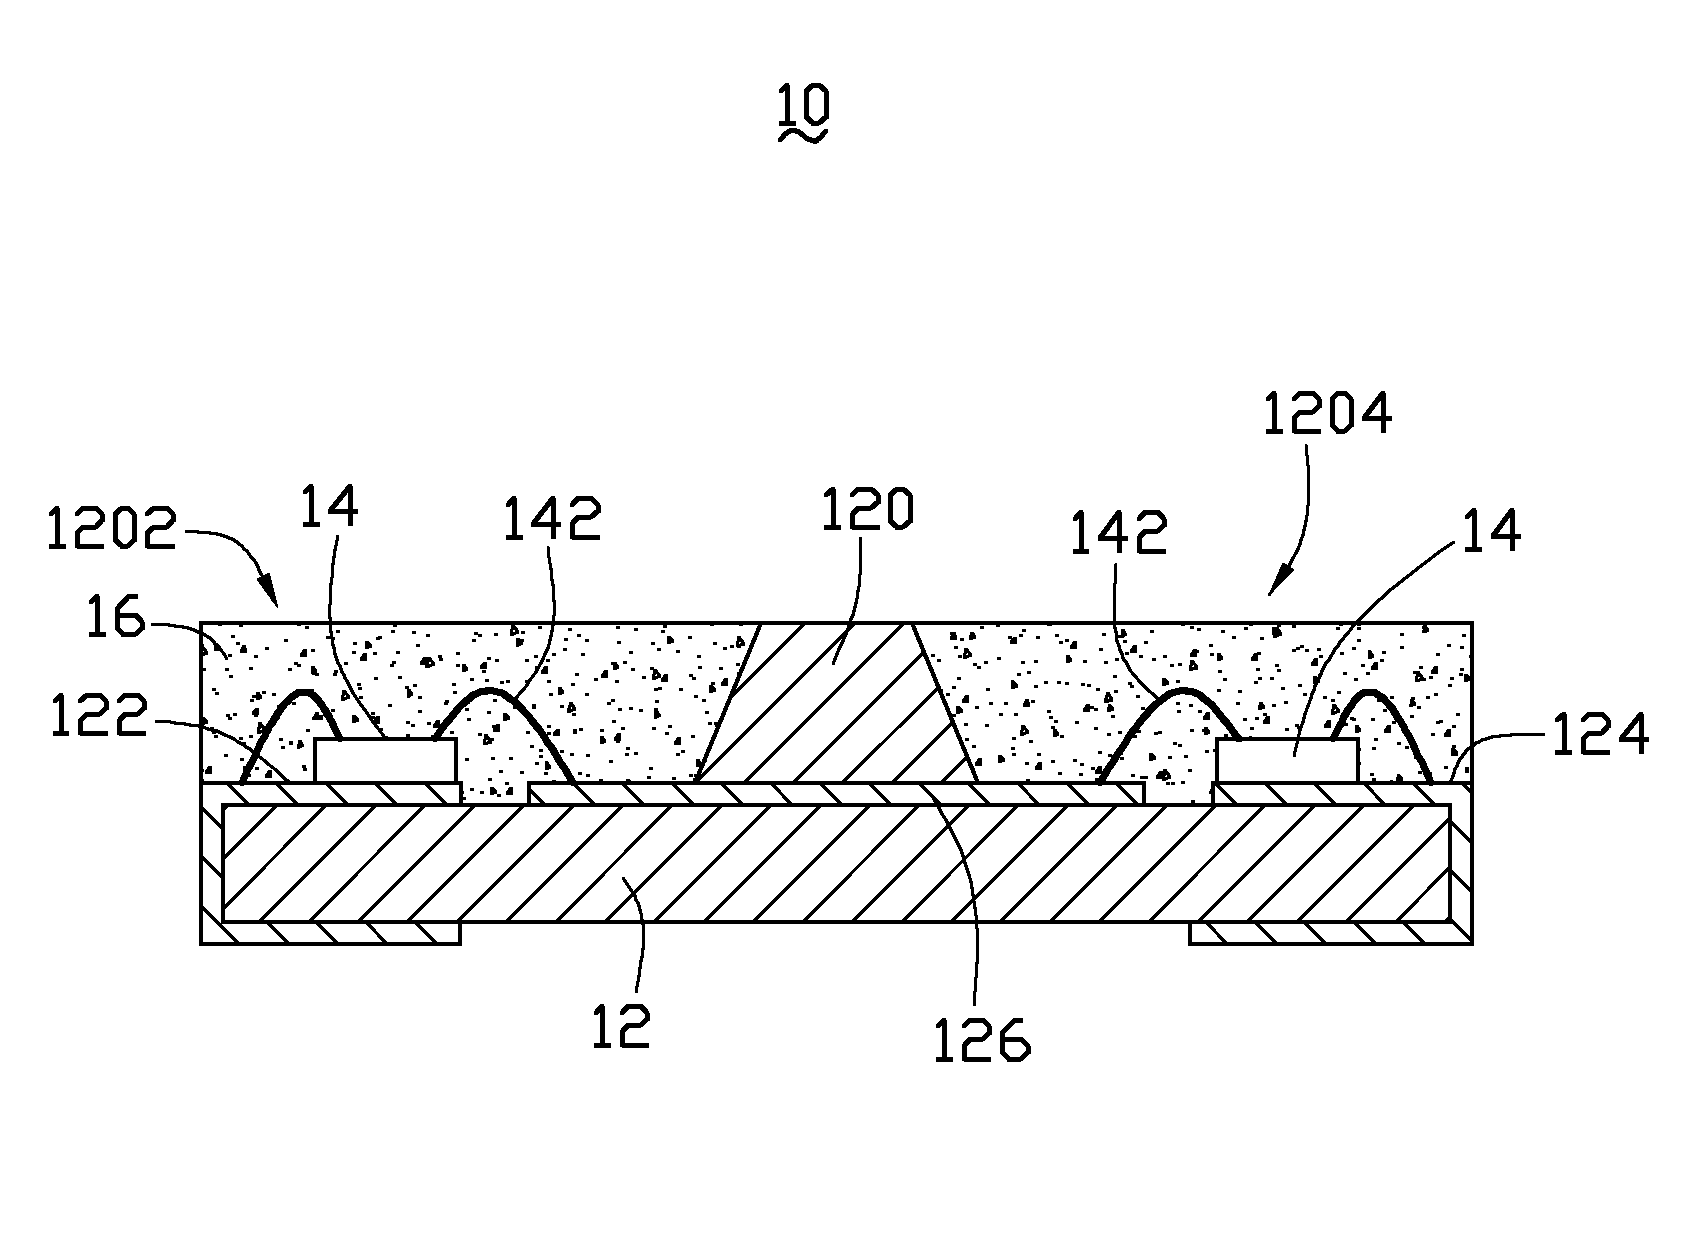 LED package device